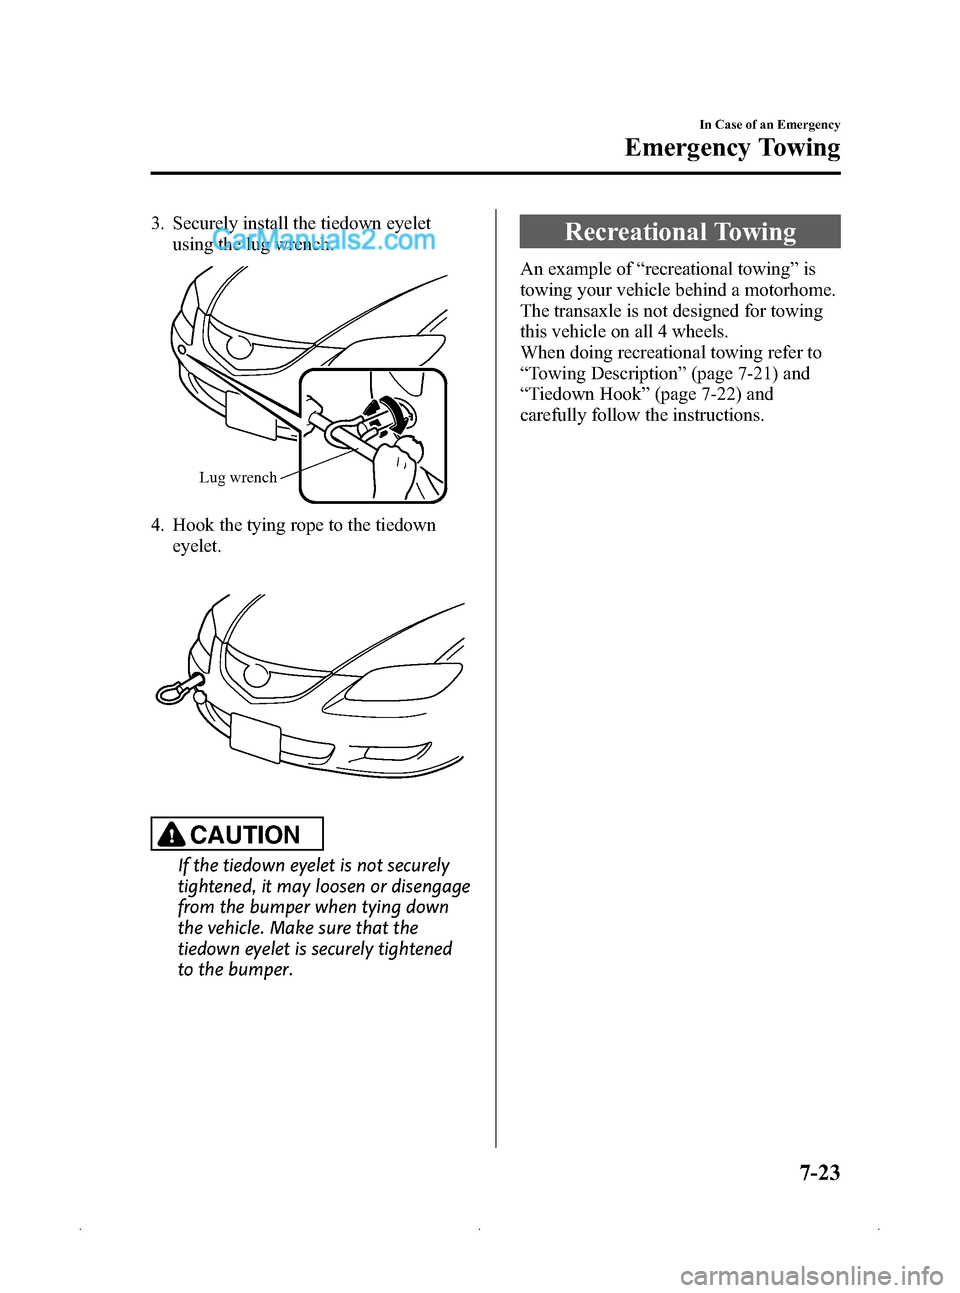 MAZDA MODEL MAZDASPEED 3 2009  Owners Manual (in English) Black plate (285,1)
3. Securely install the tiedown eyeletusing the lug wrench.
Lug wrench
4. Hook the tying rope to the tiedown
eyelet.
CAUTION
If the tiedown eyelet is not securely
tightened, it may